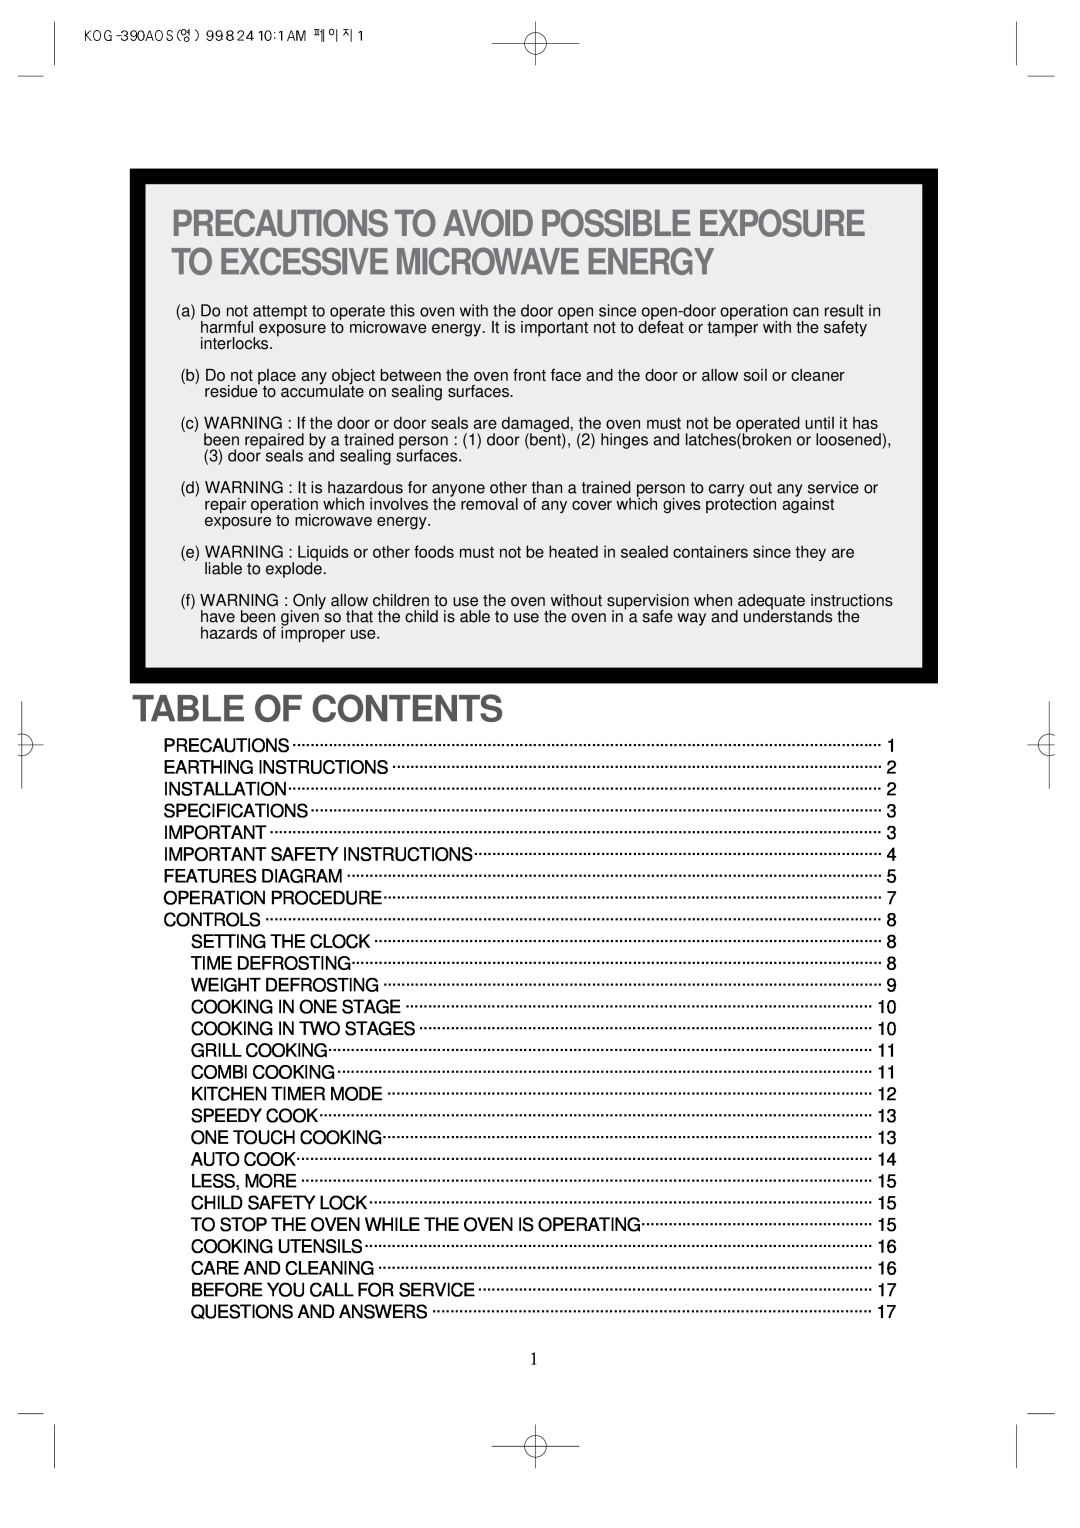 Daewoo KOG-390A manual Table Of Contents, Precautions To Avoid Possible Exposure To Excessive Microwave Energy 